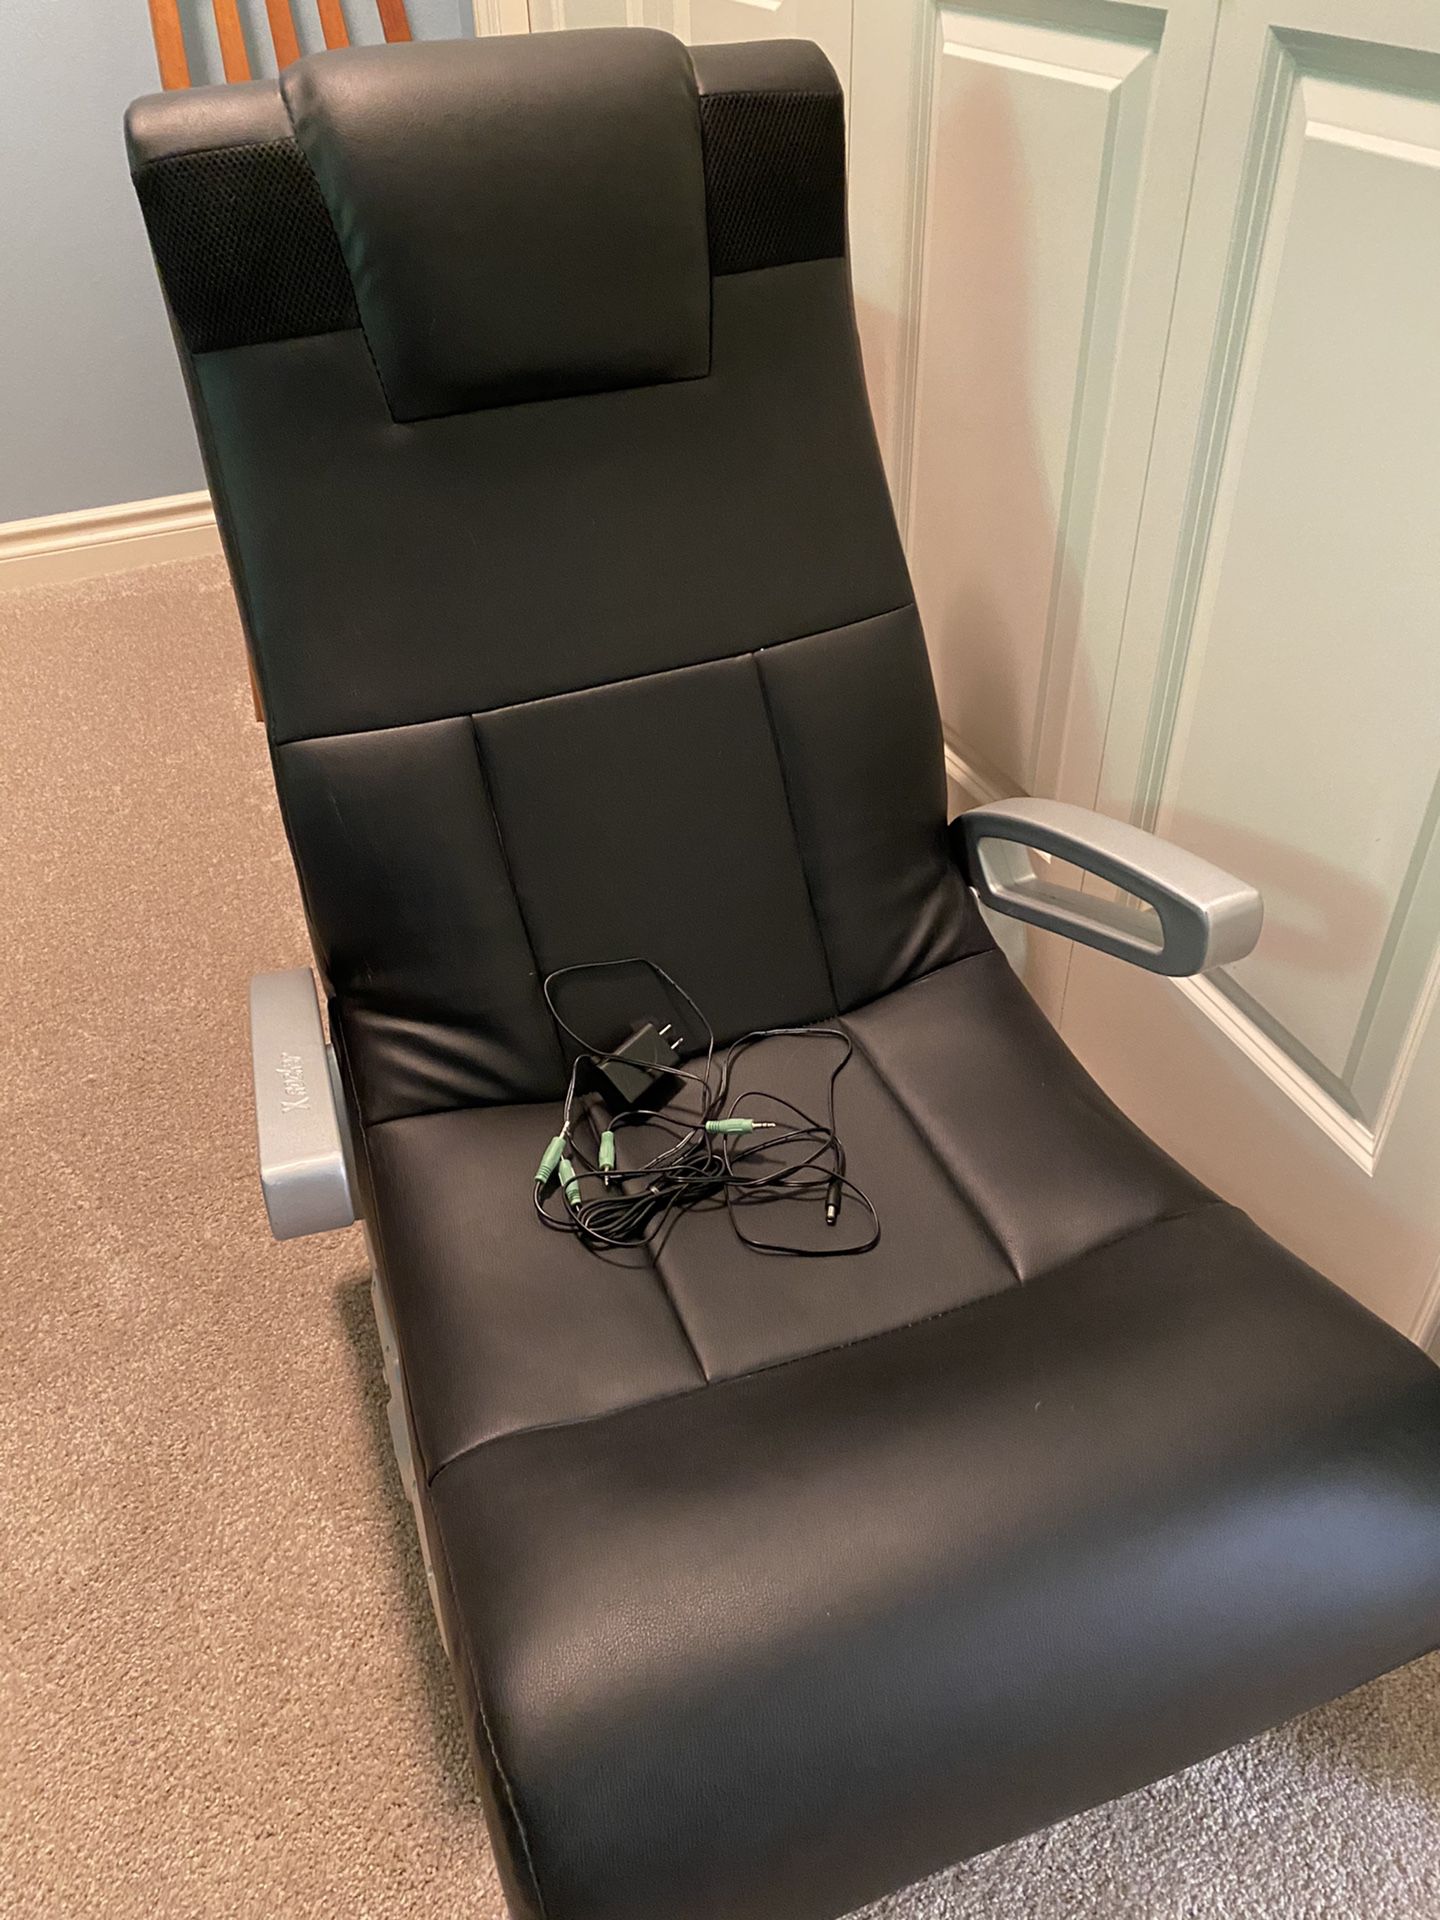 Gaming chair with built in speakers.